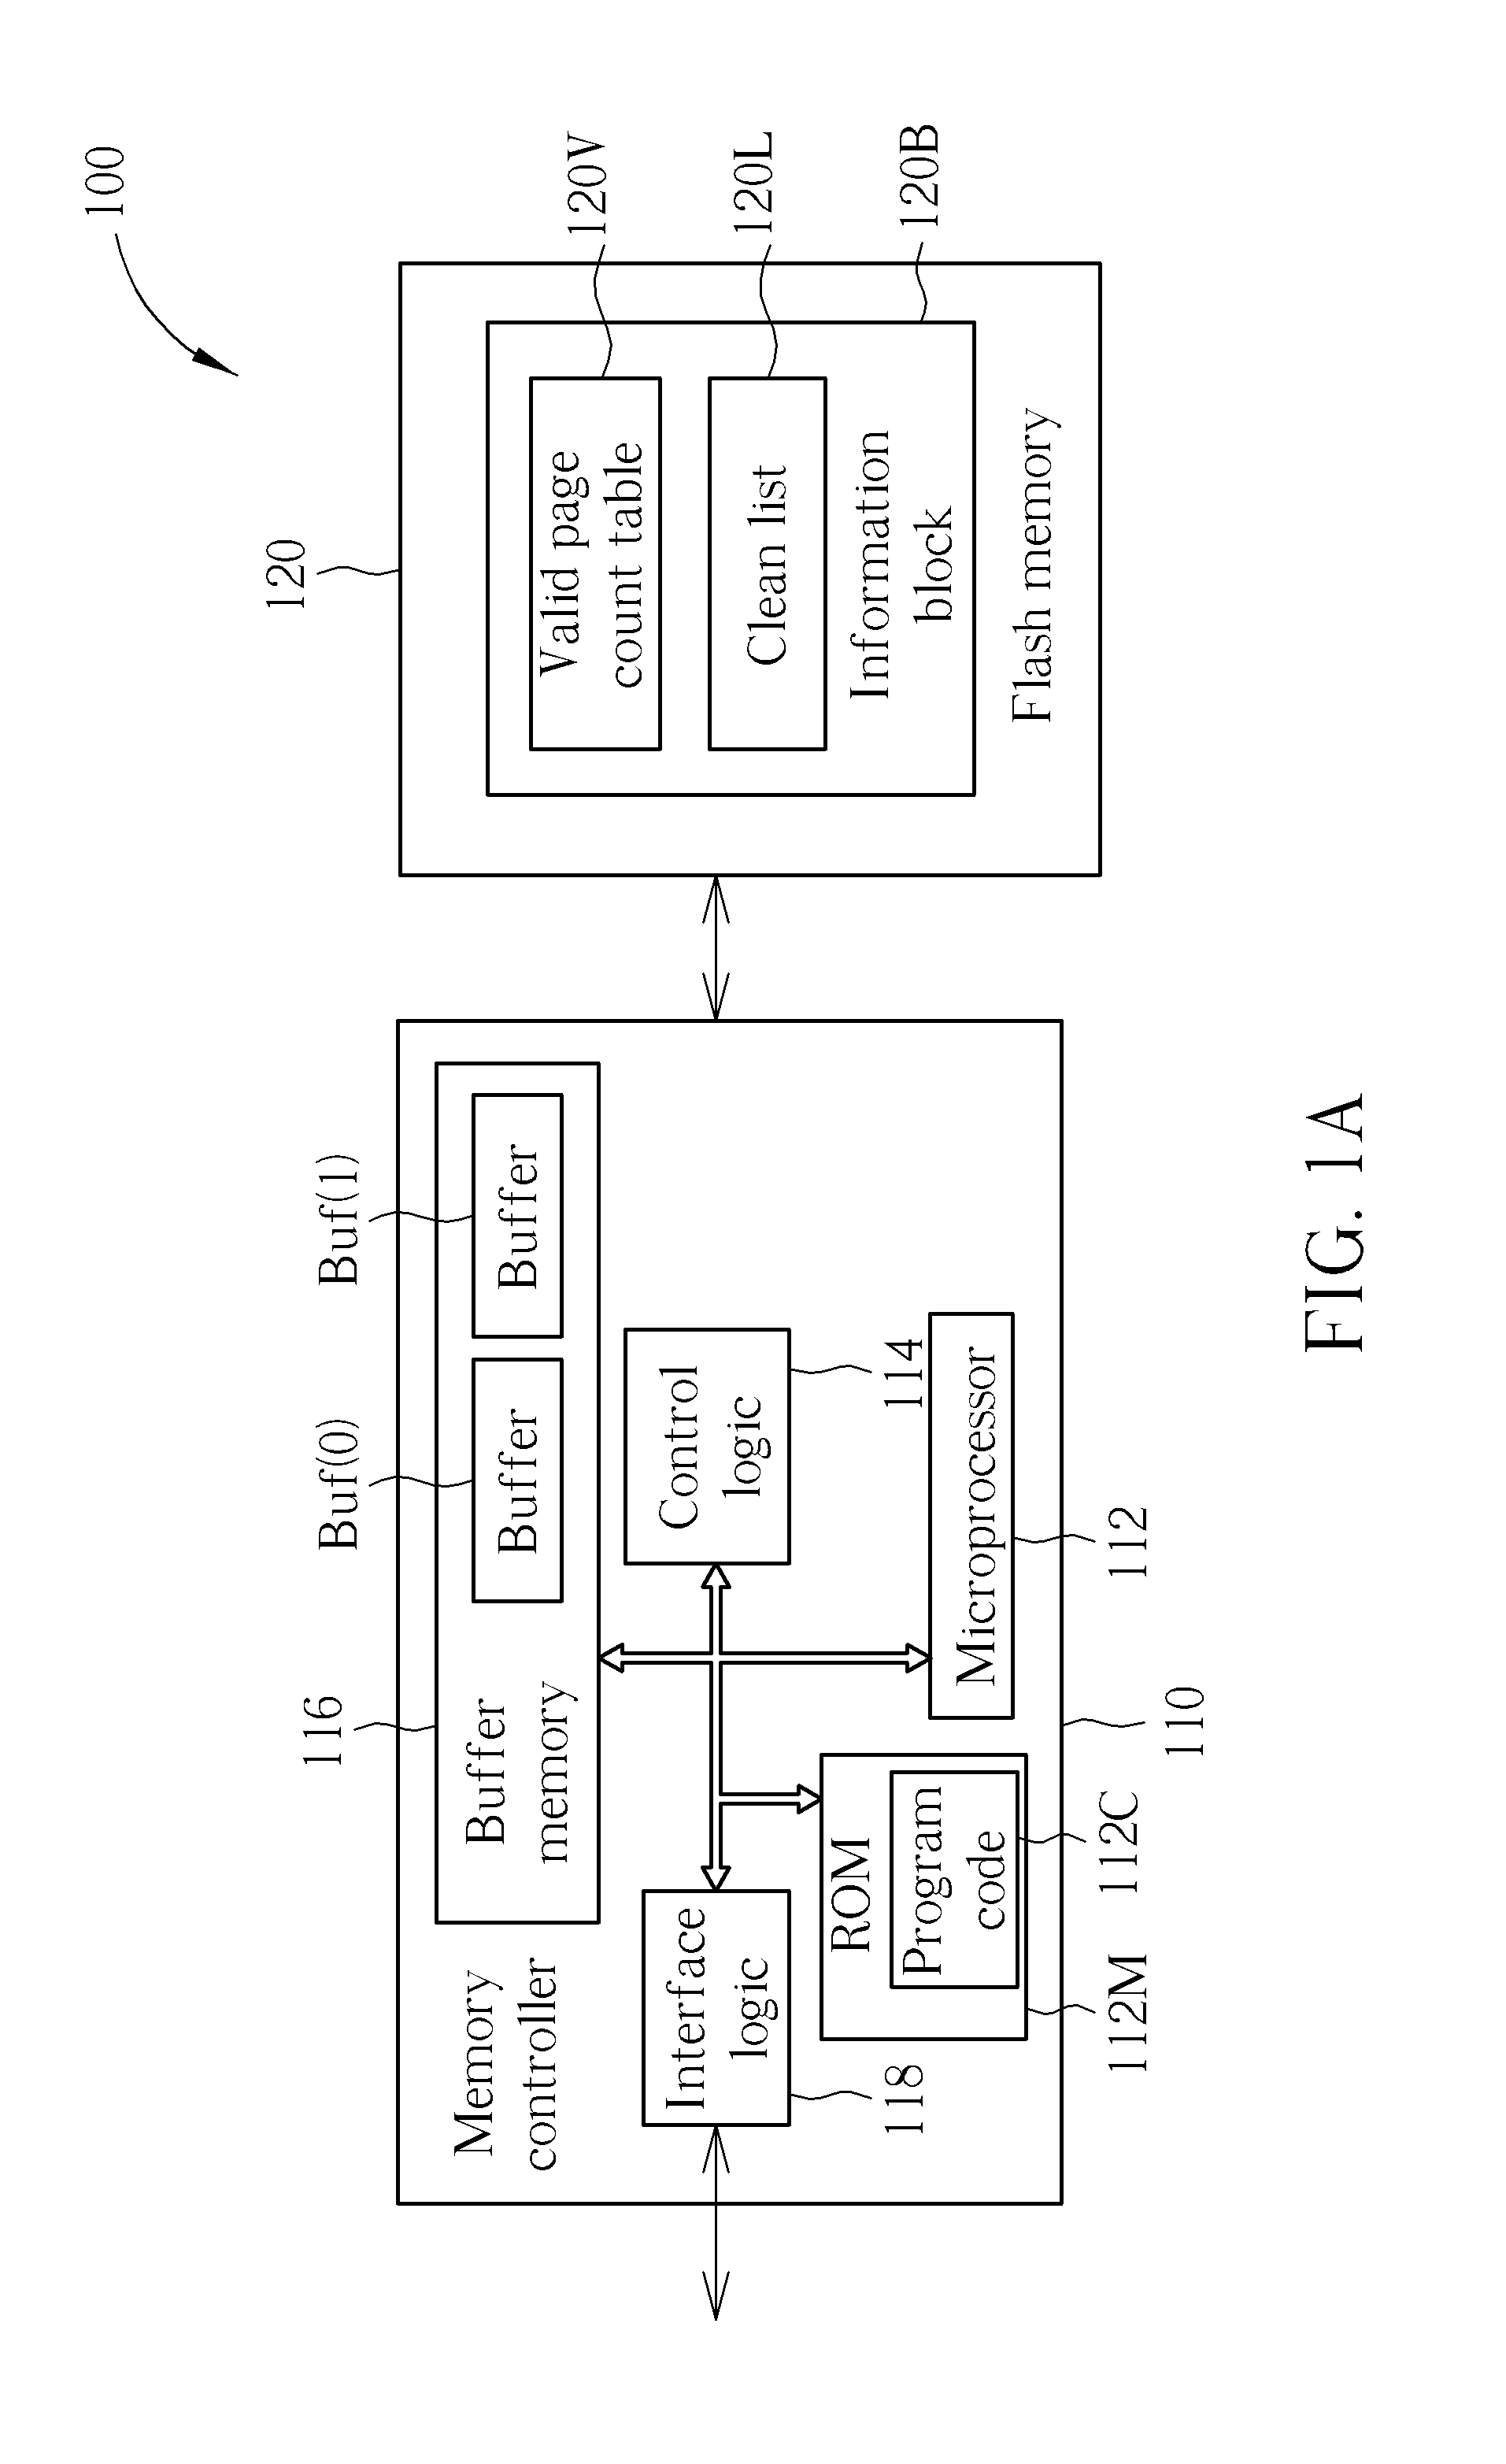 Method for performing block management/flash memory management, and associated memory device and controller thereof